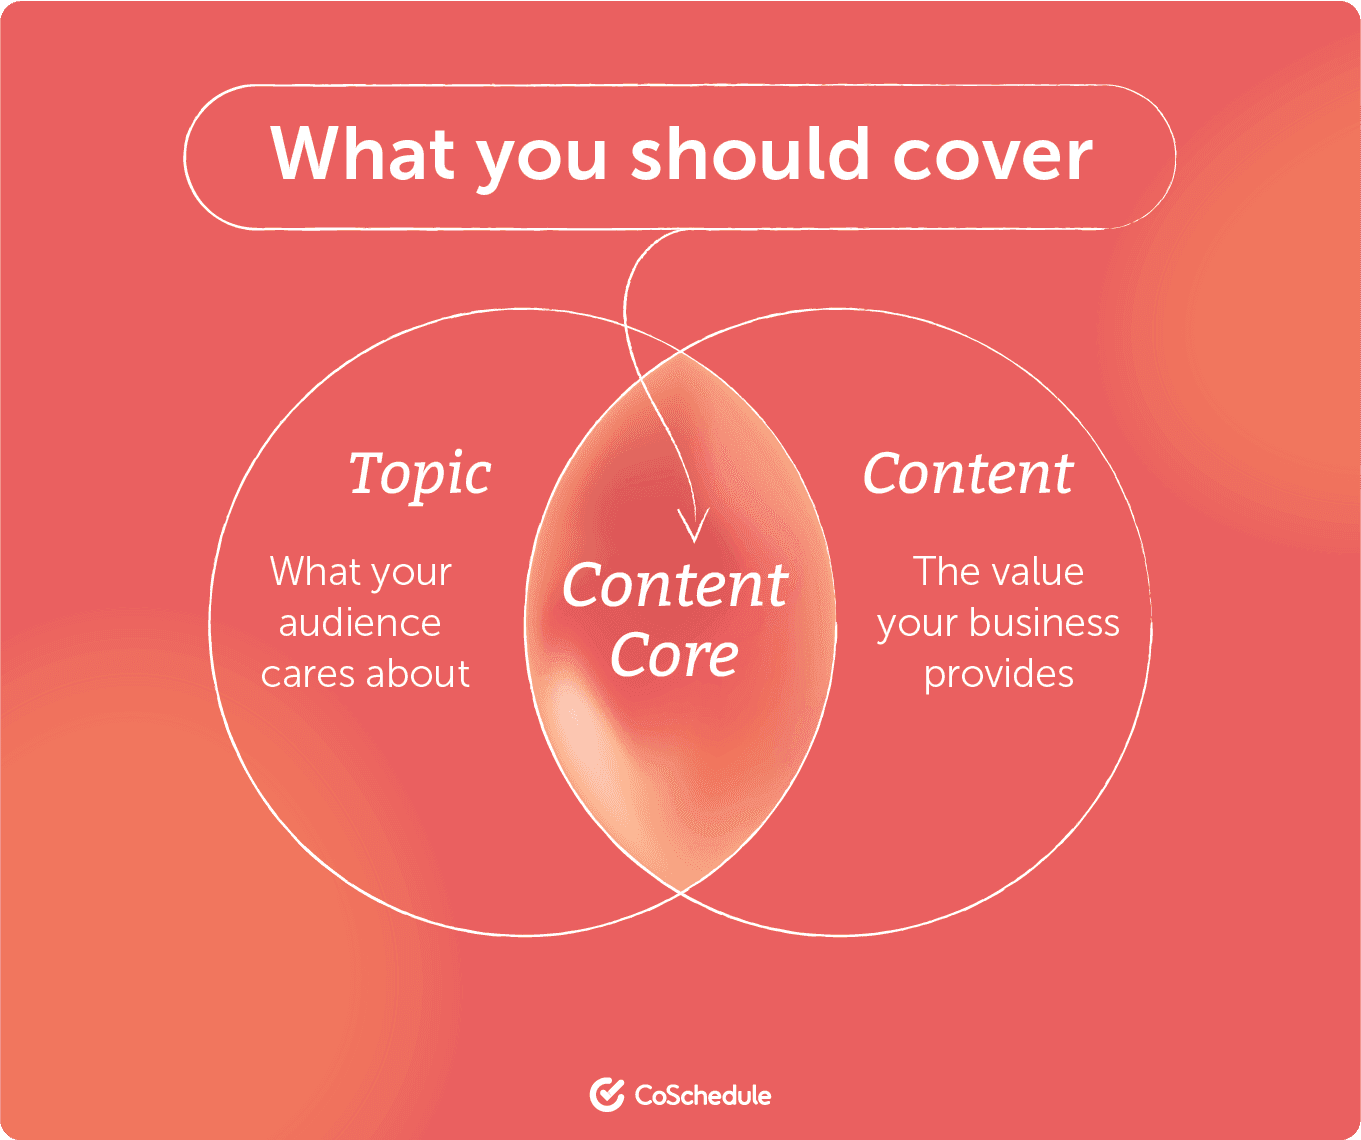 What you should cover content core